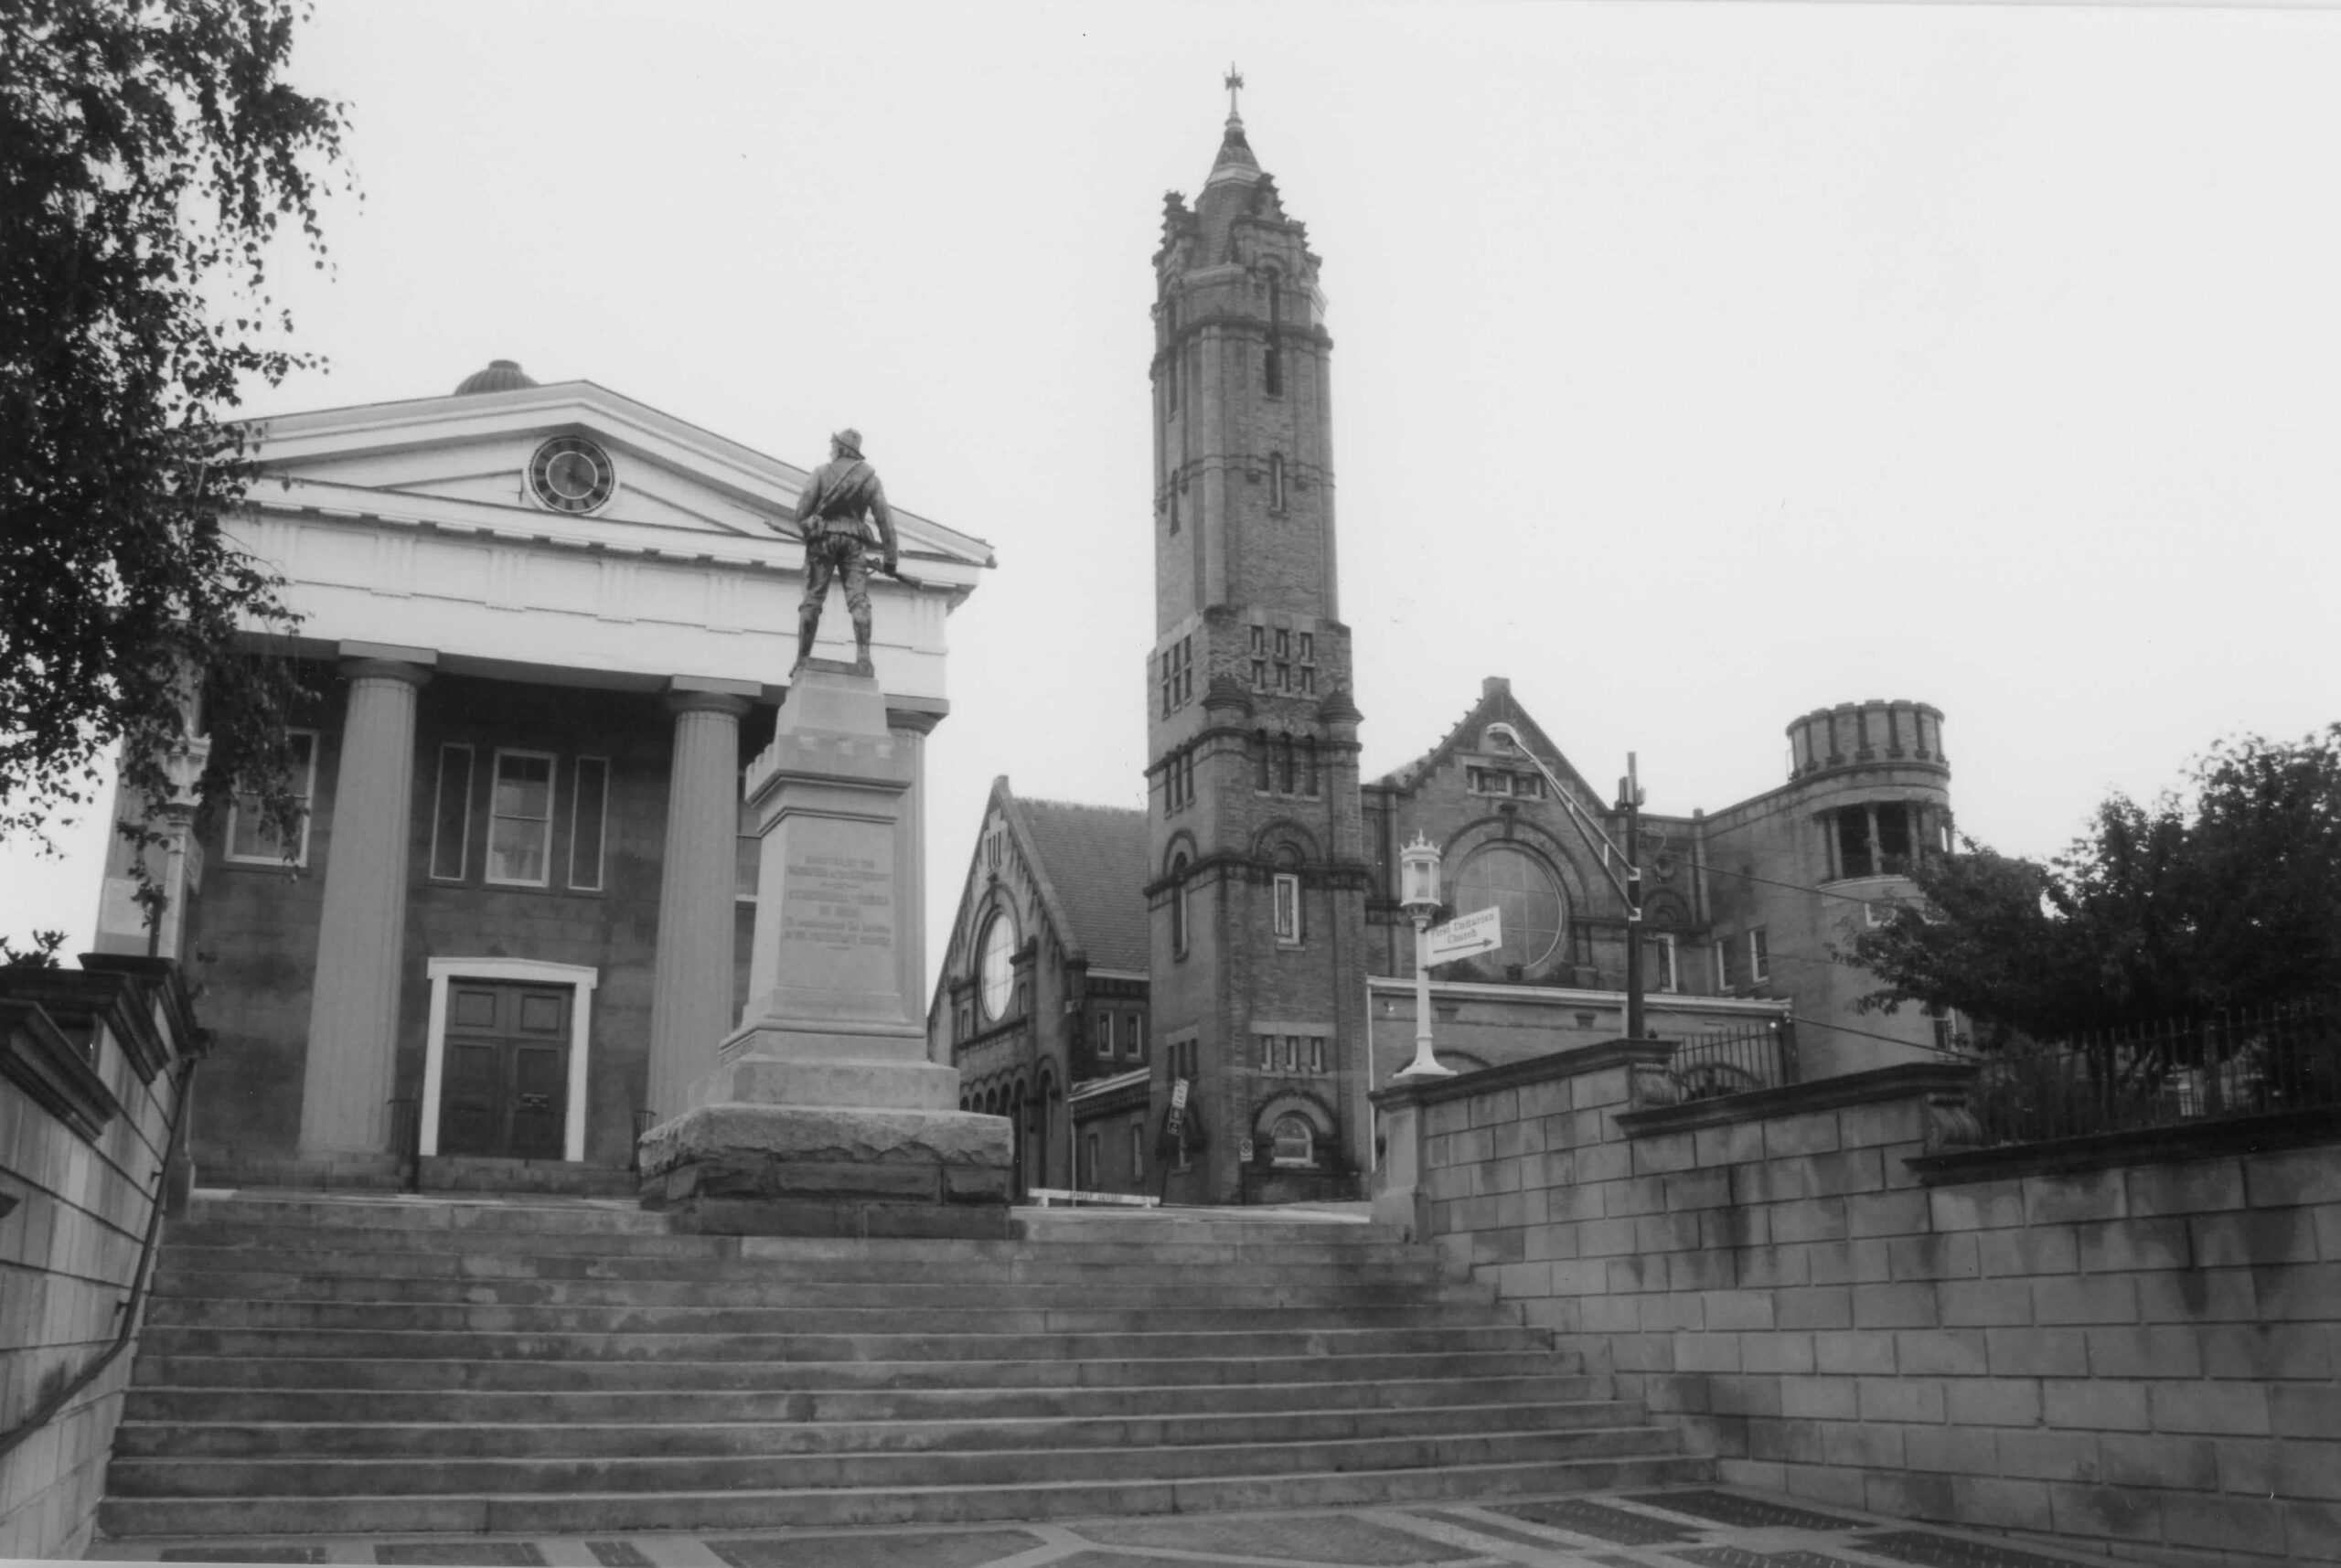 Monument Terrace (Old Courthouse, Confederate Monument, First Presbyterian Church). Photo credit: Alison Blanton, 2000